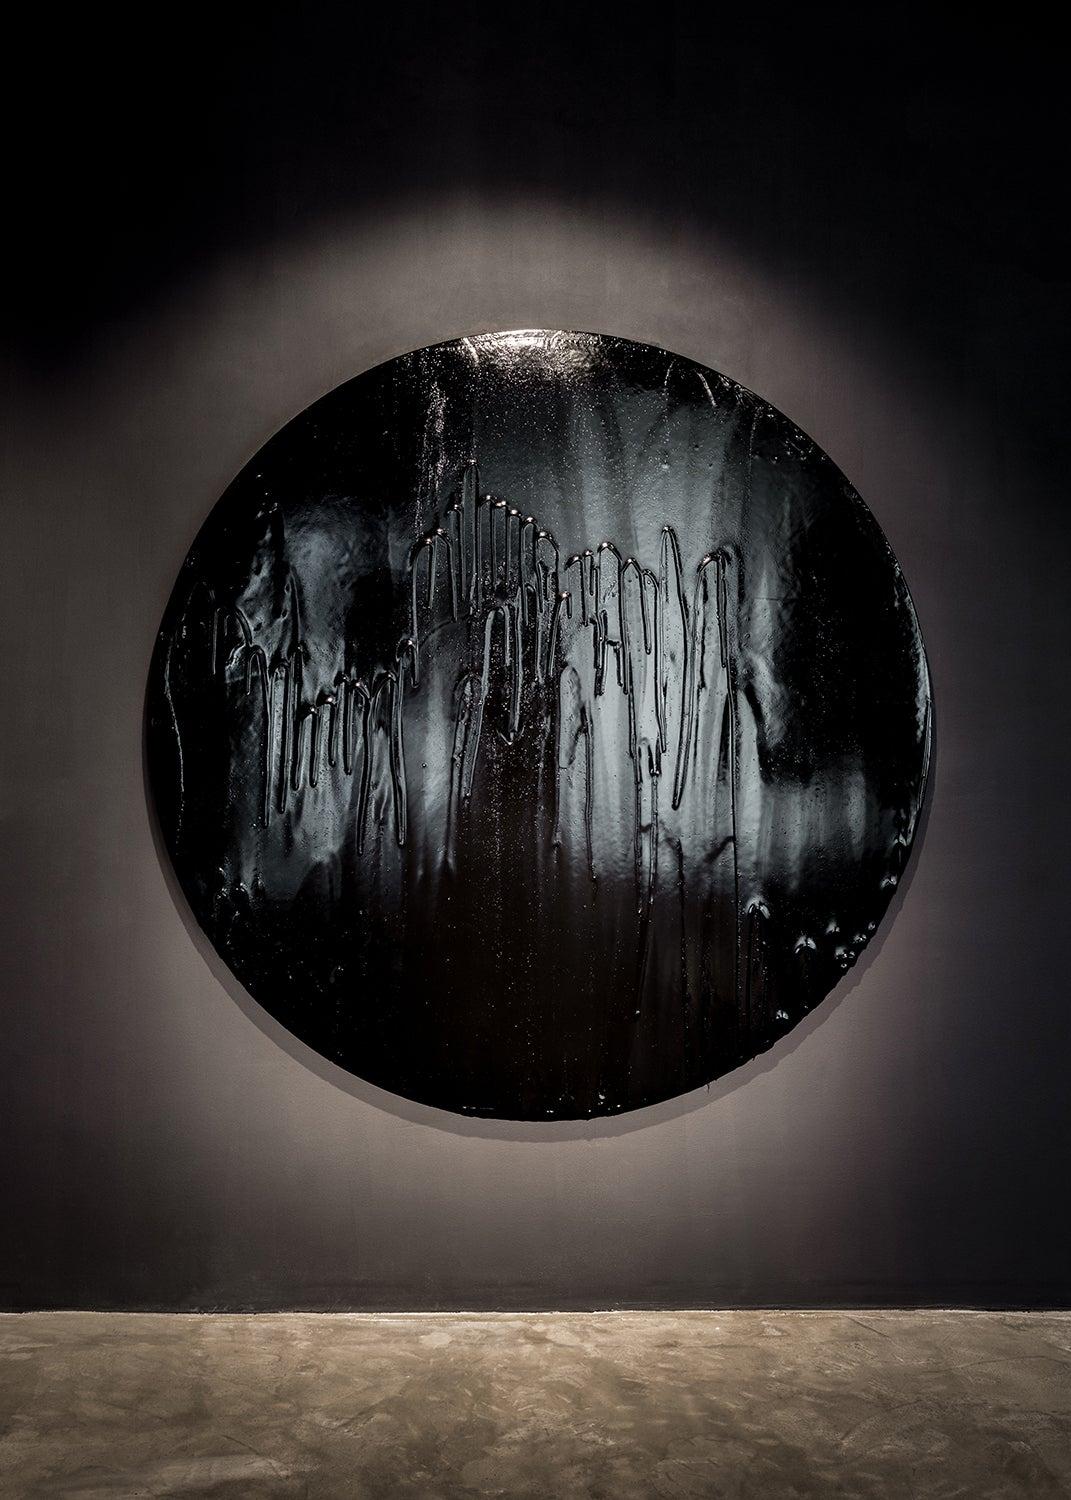 The dynamics of transformation is a driving concept and process behind Biagi’s work, in particular, the transformative power of coating everyday objects with layers of viscous tar. With his series of round paintings, the transformative power of tar